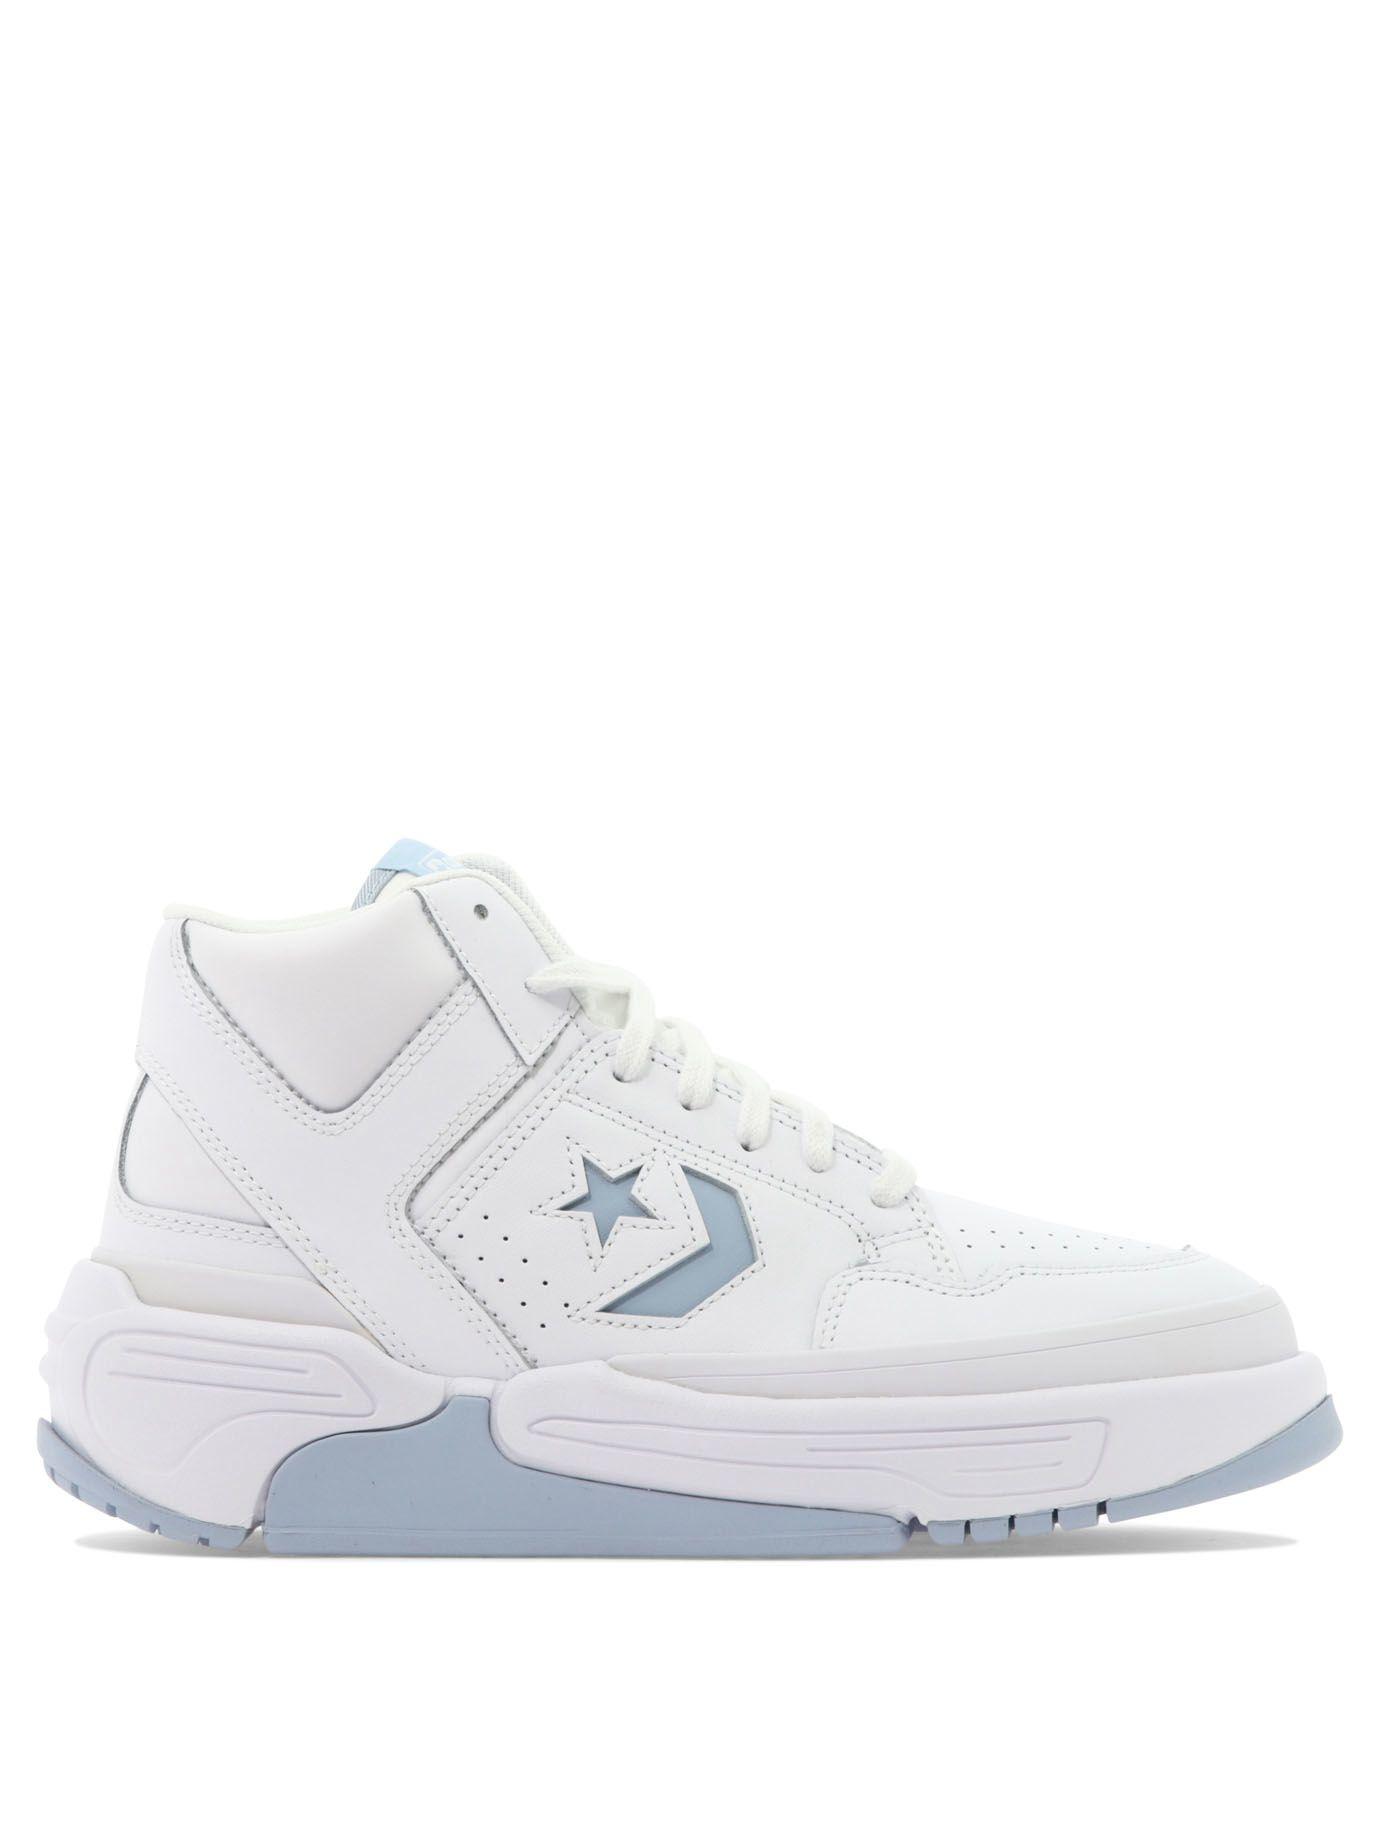 Converse "weapon Cx" Sneakers in White for Men | Lyst Australia